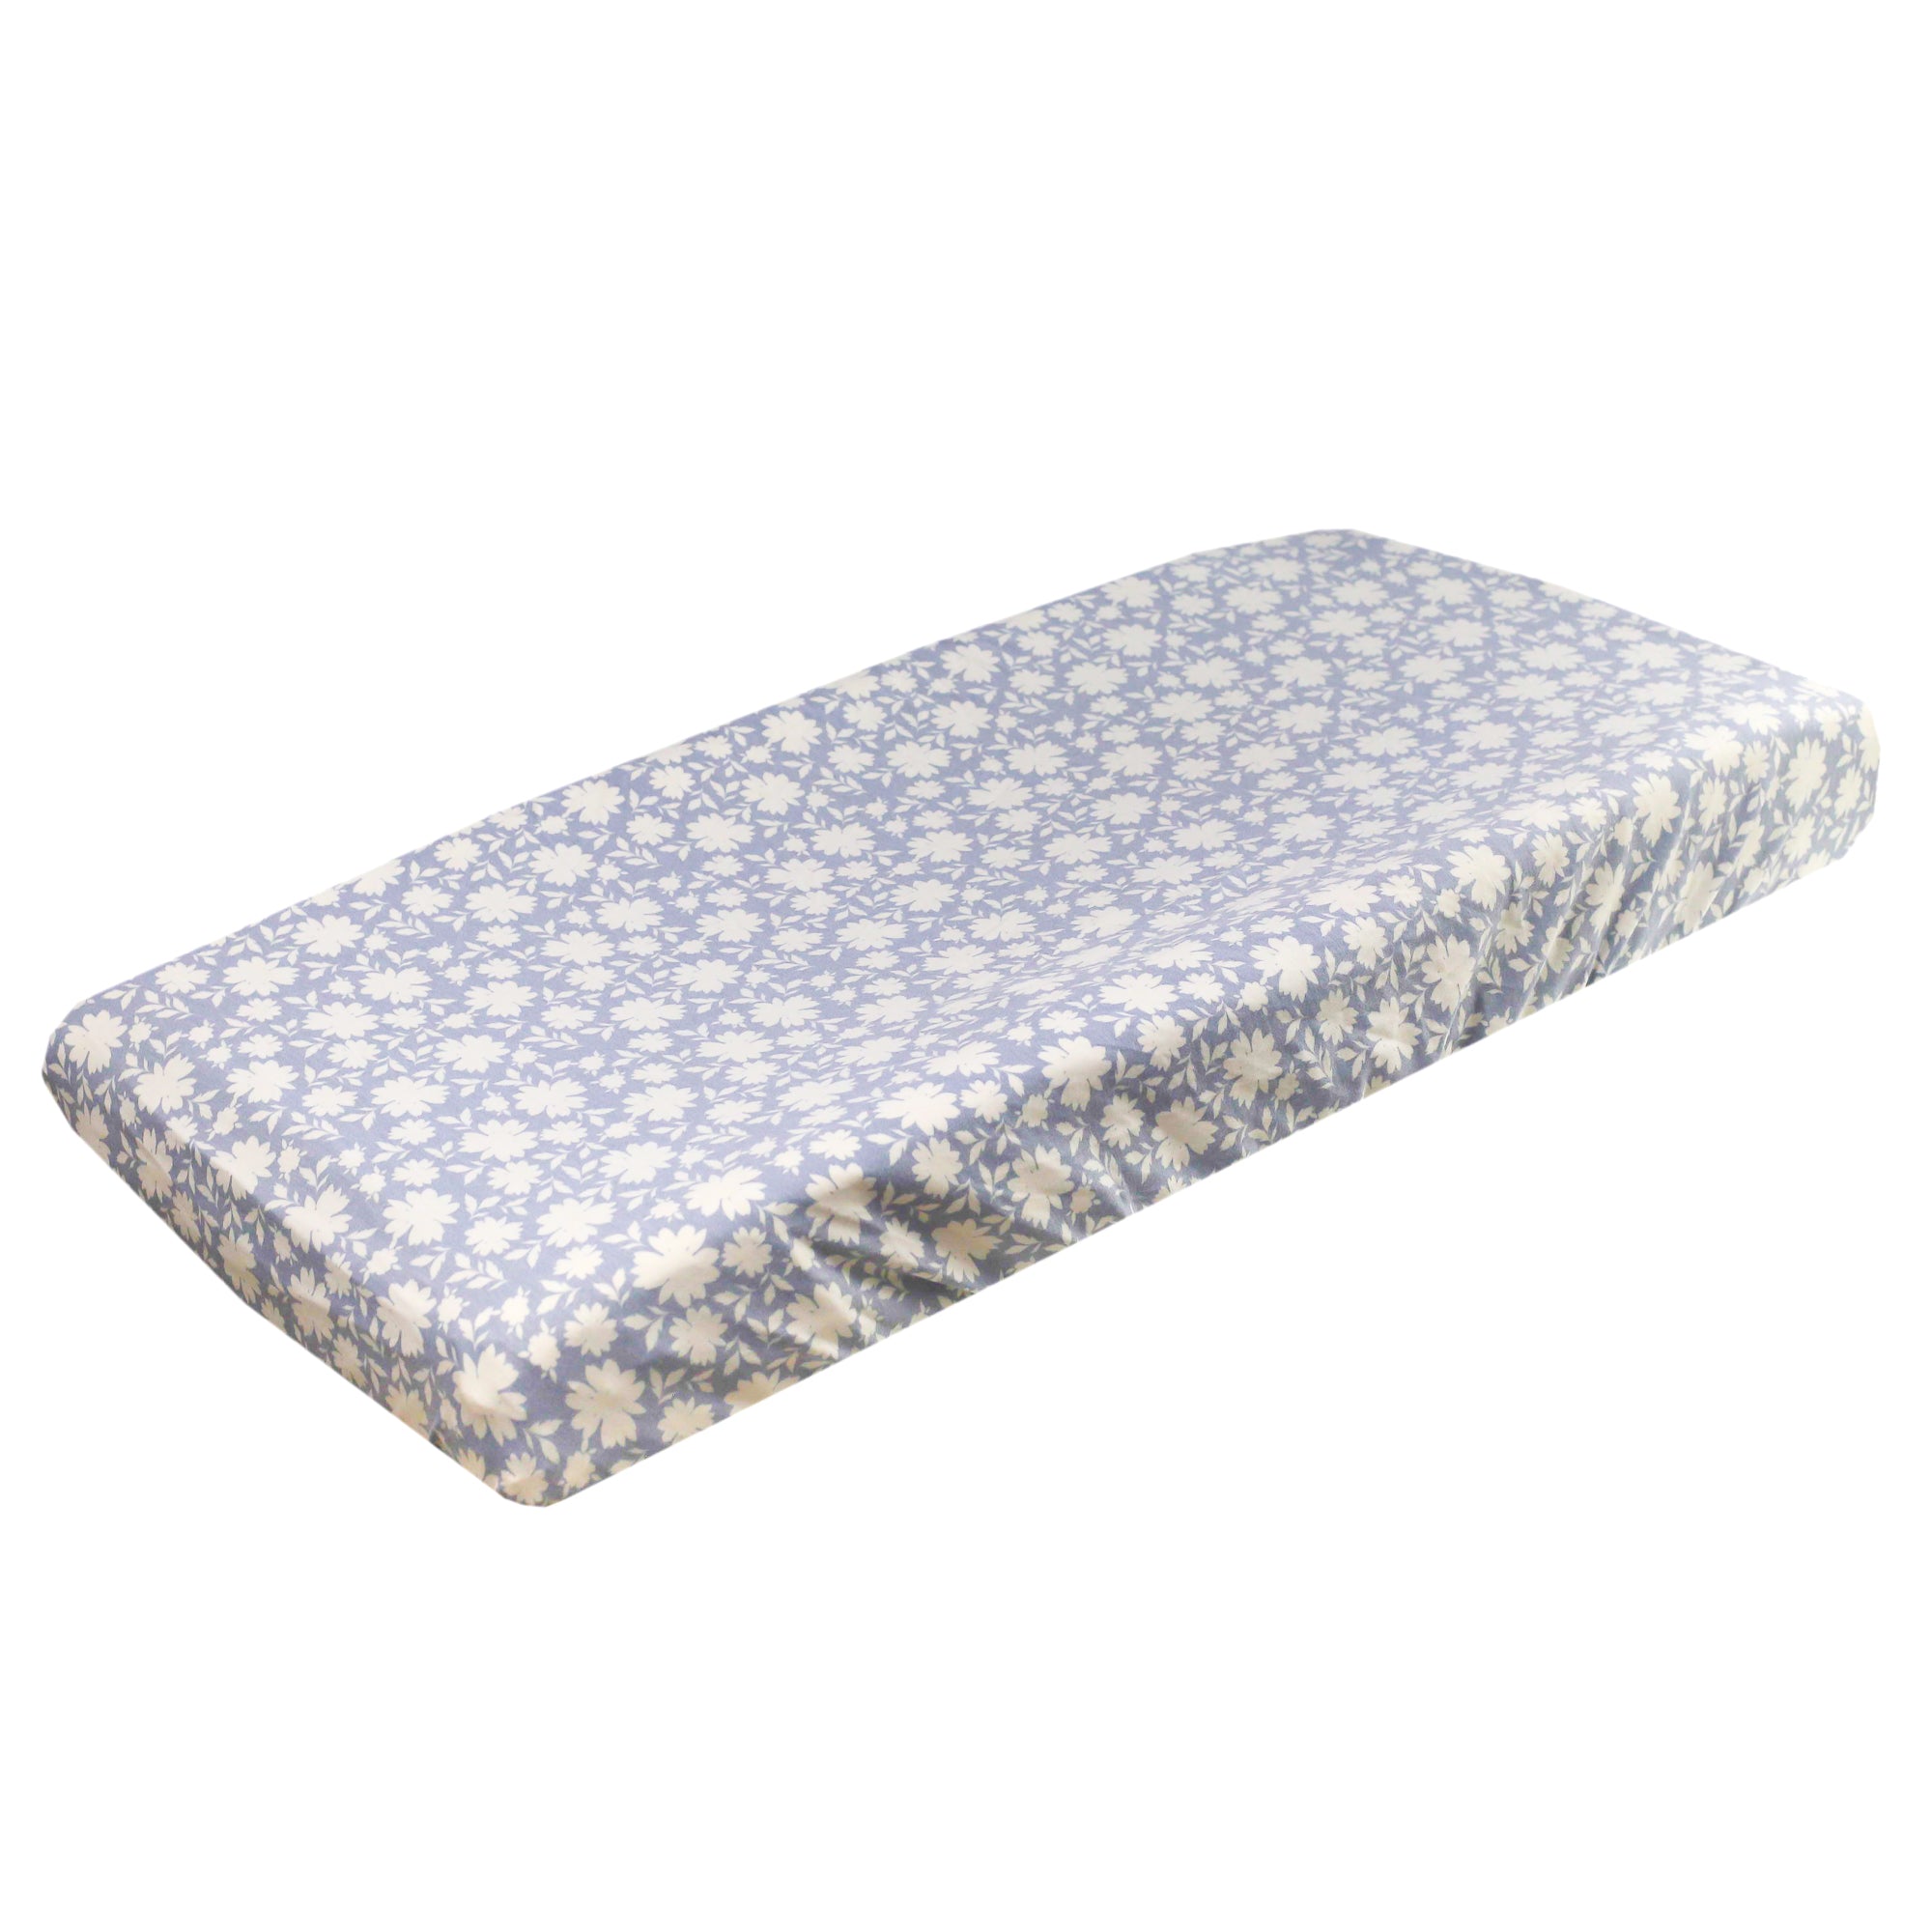 Premium Knit Diaper Changing Pad Cover - Lacie